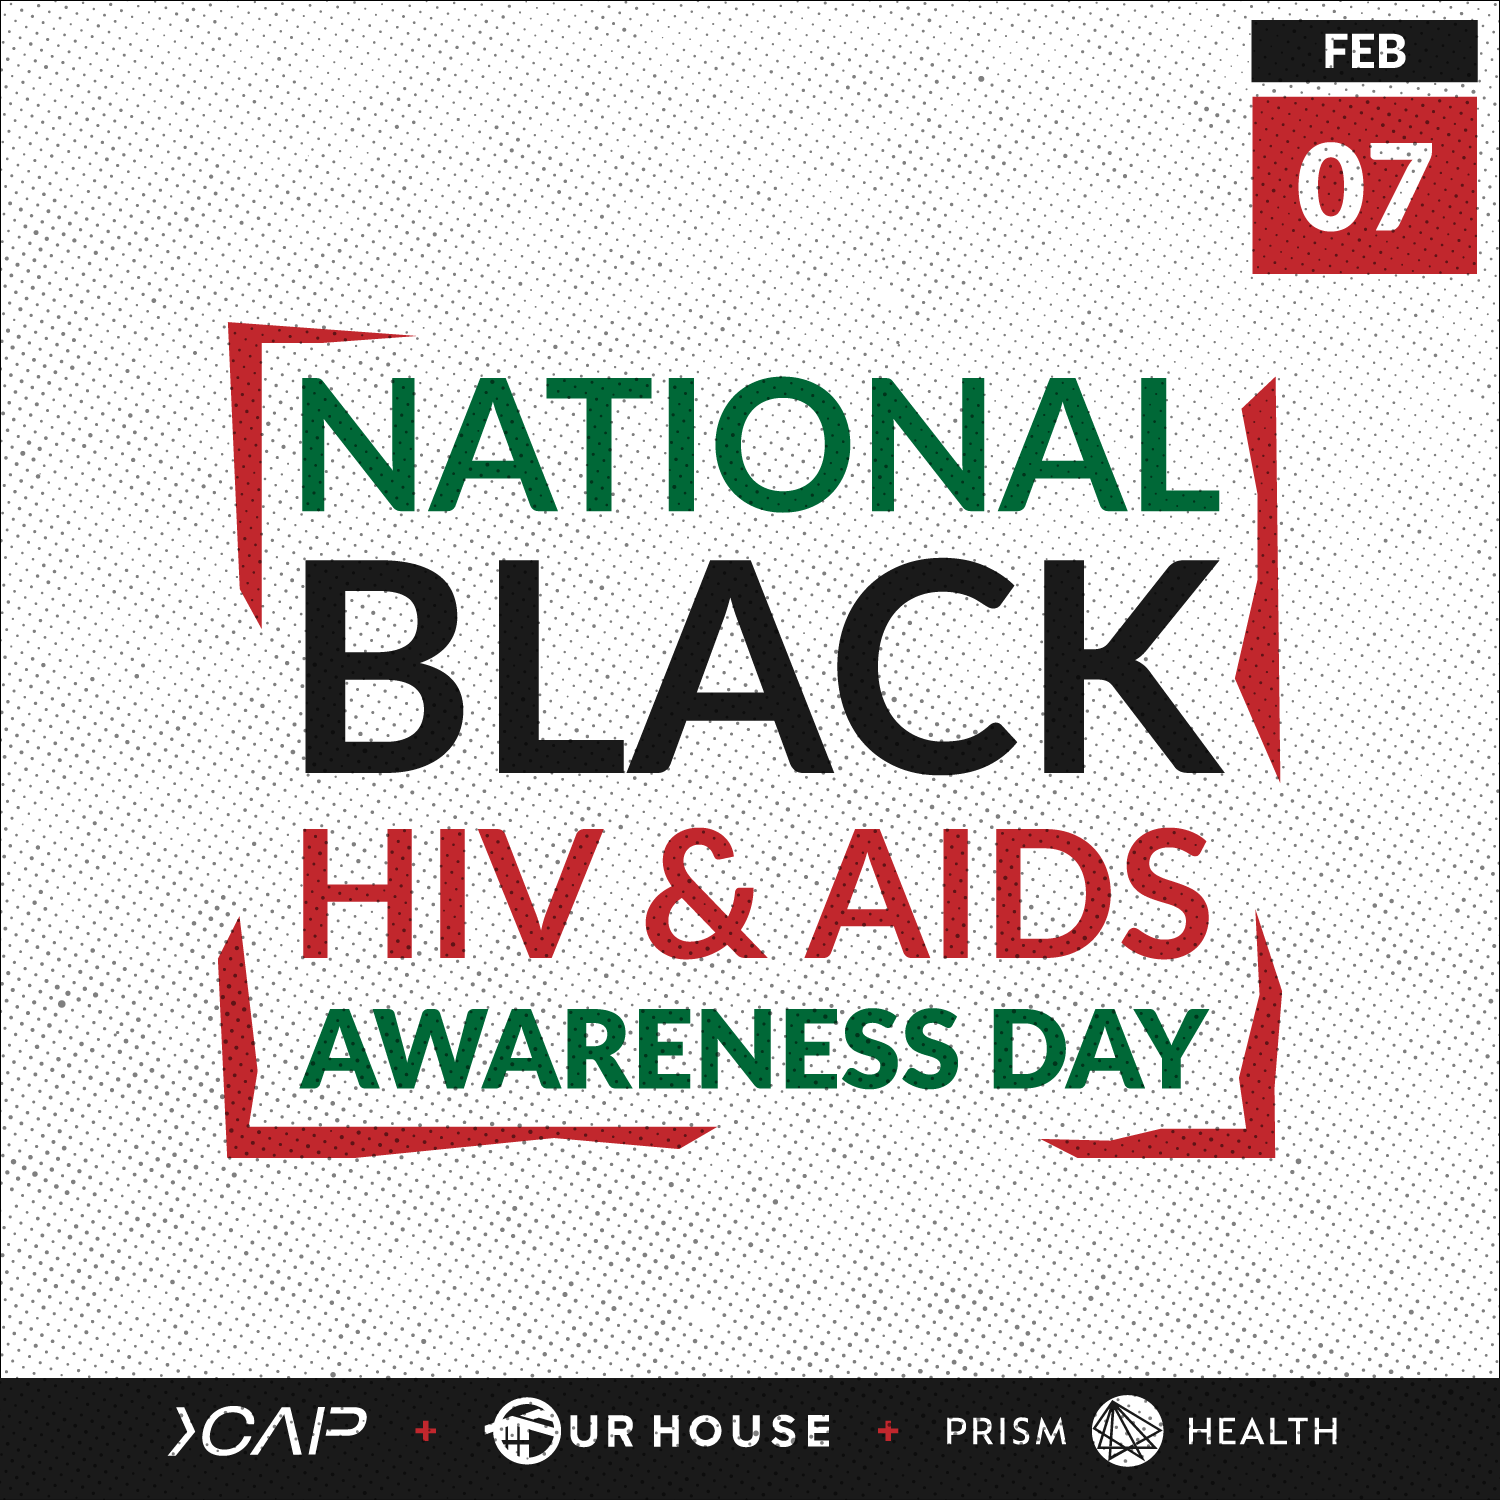 Red ribbons and free testing provided on National Black HIV/AIDS Awareness  Day